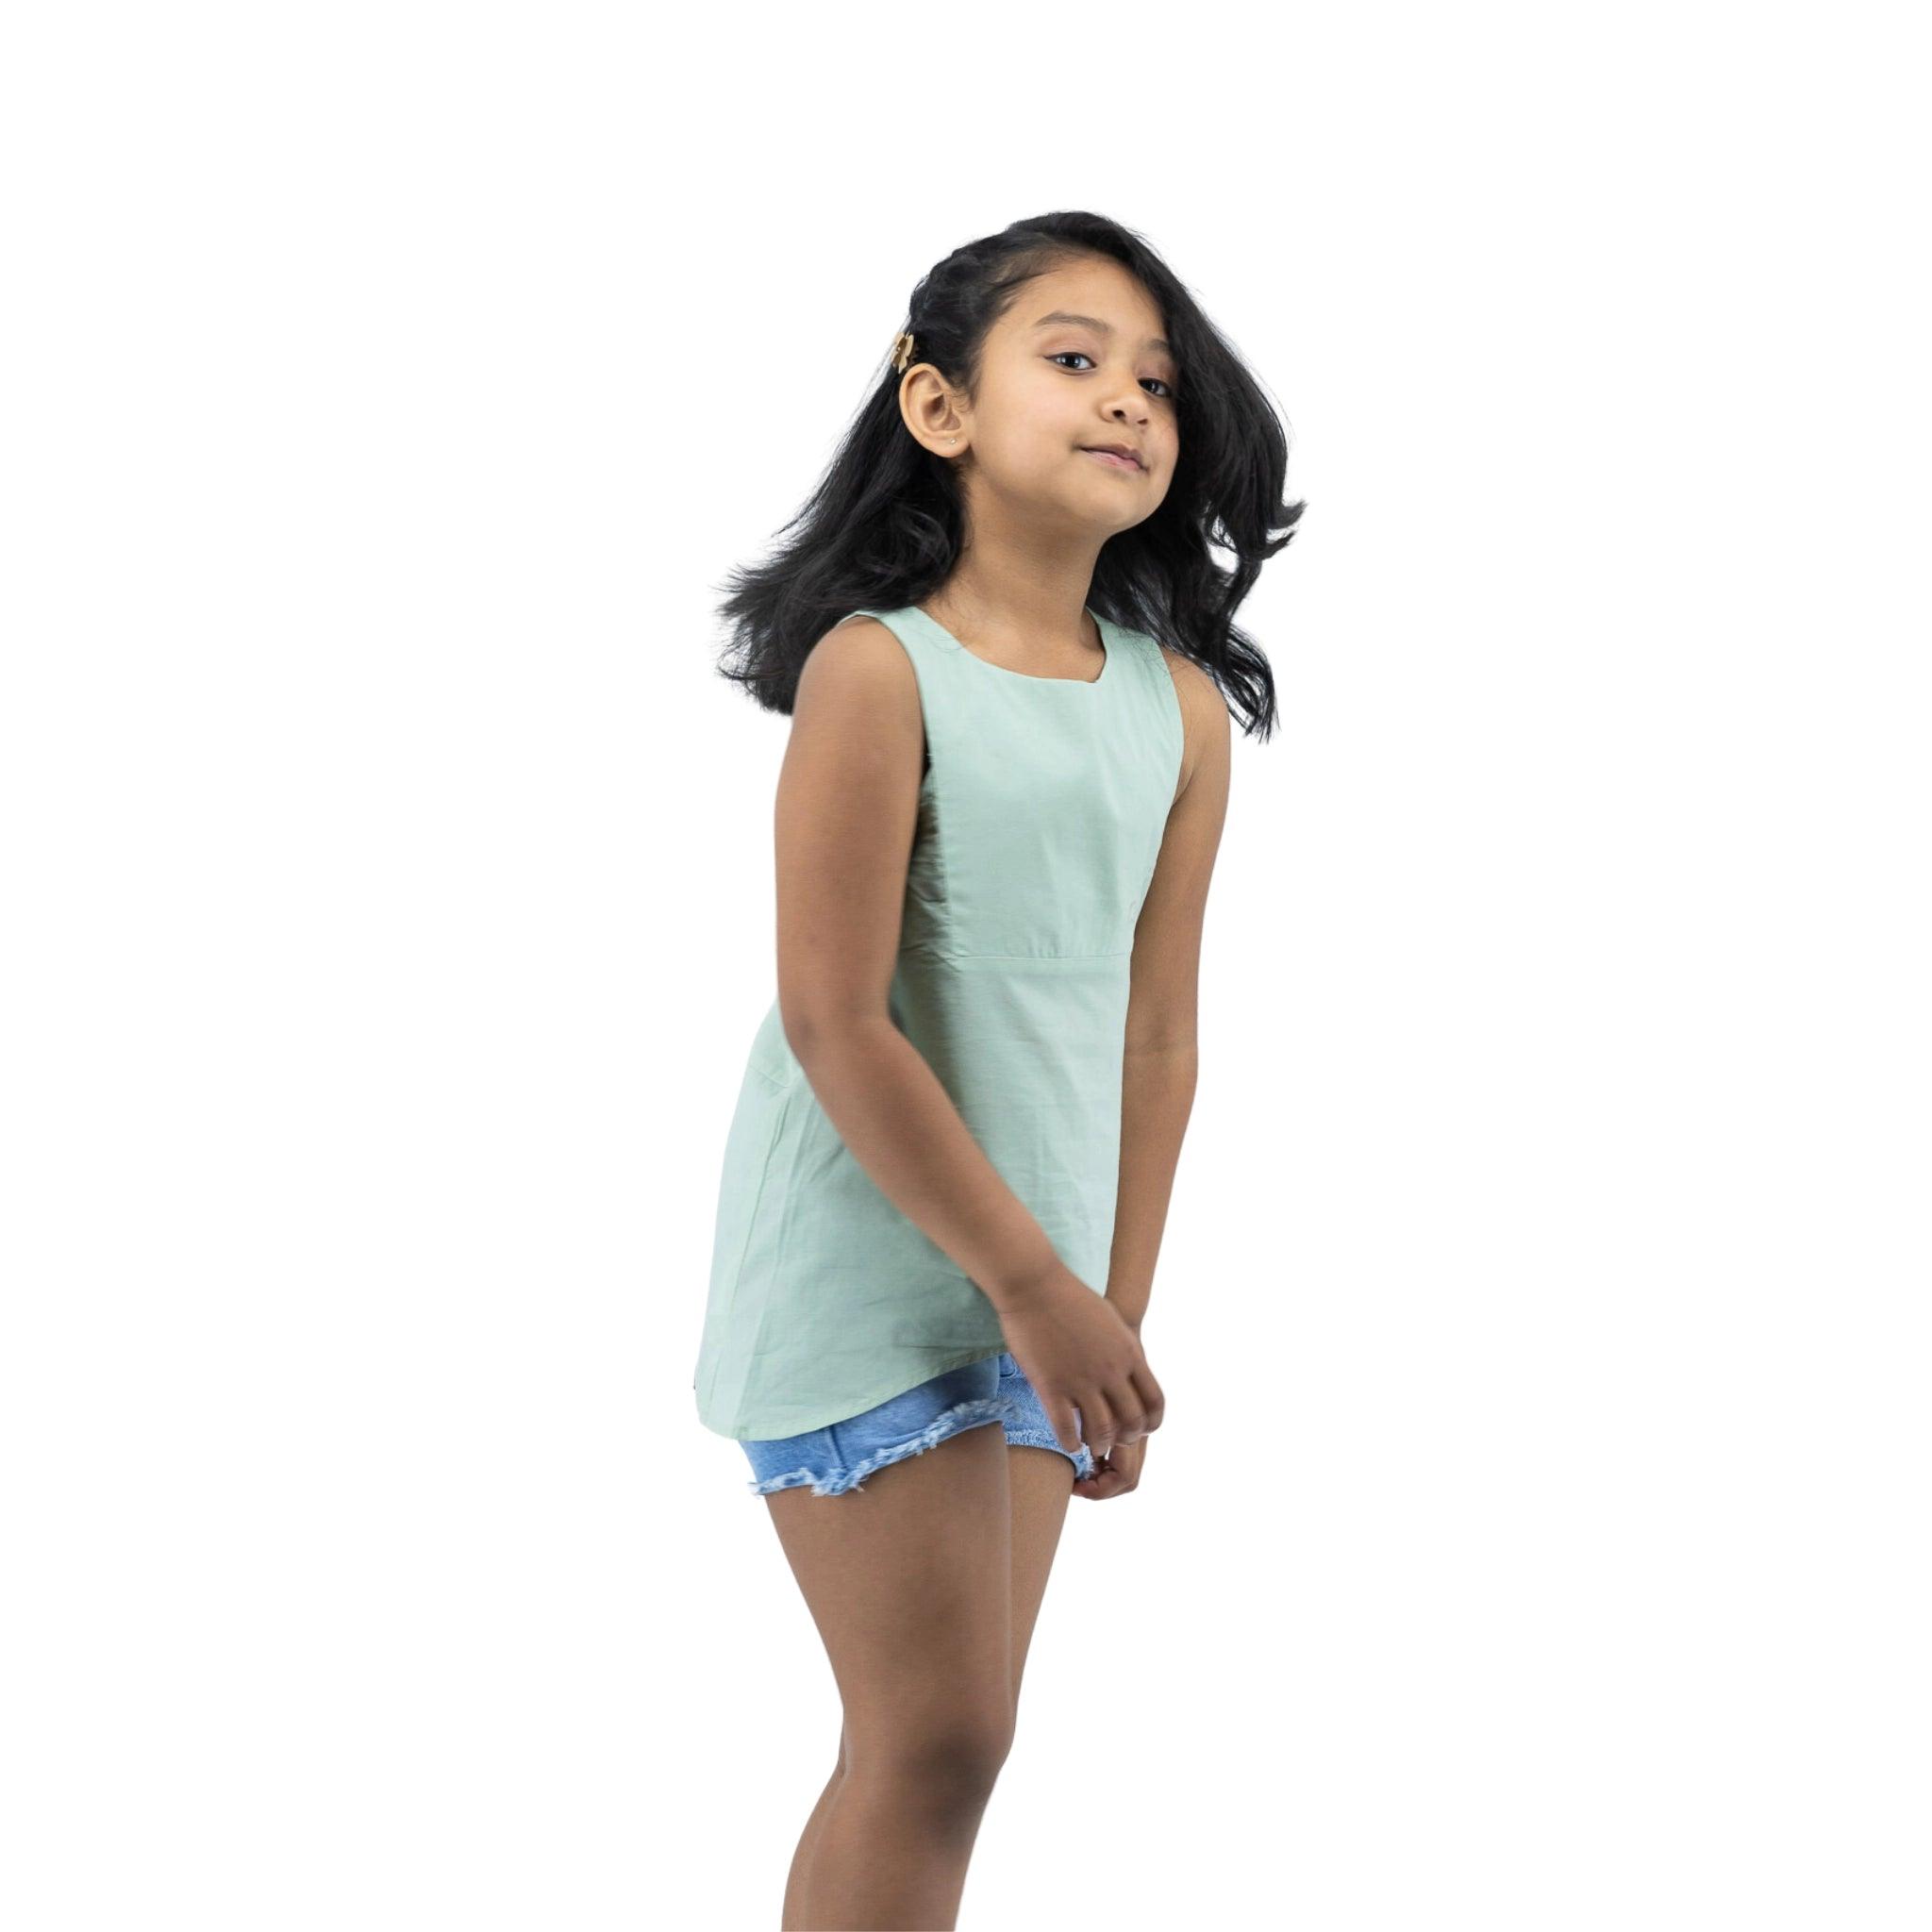 Young girl in a Karee Smoke Green Cotton Bib Neck Top for kids and denim shorts walking to her right, looking away, with a white background.